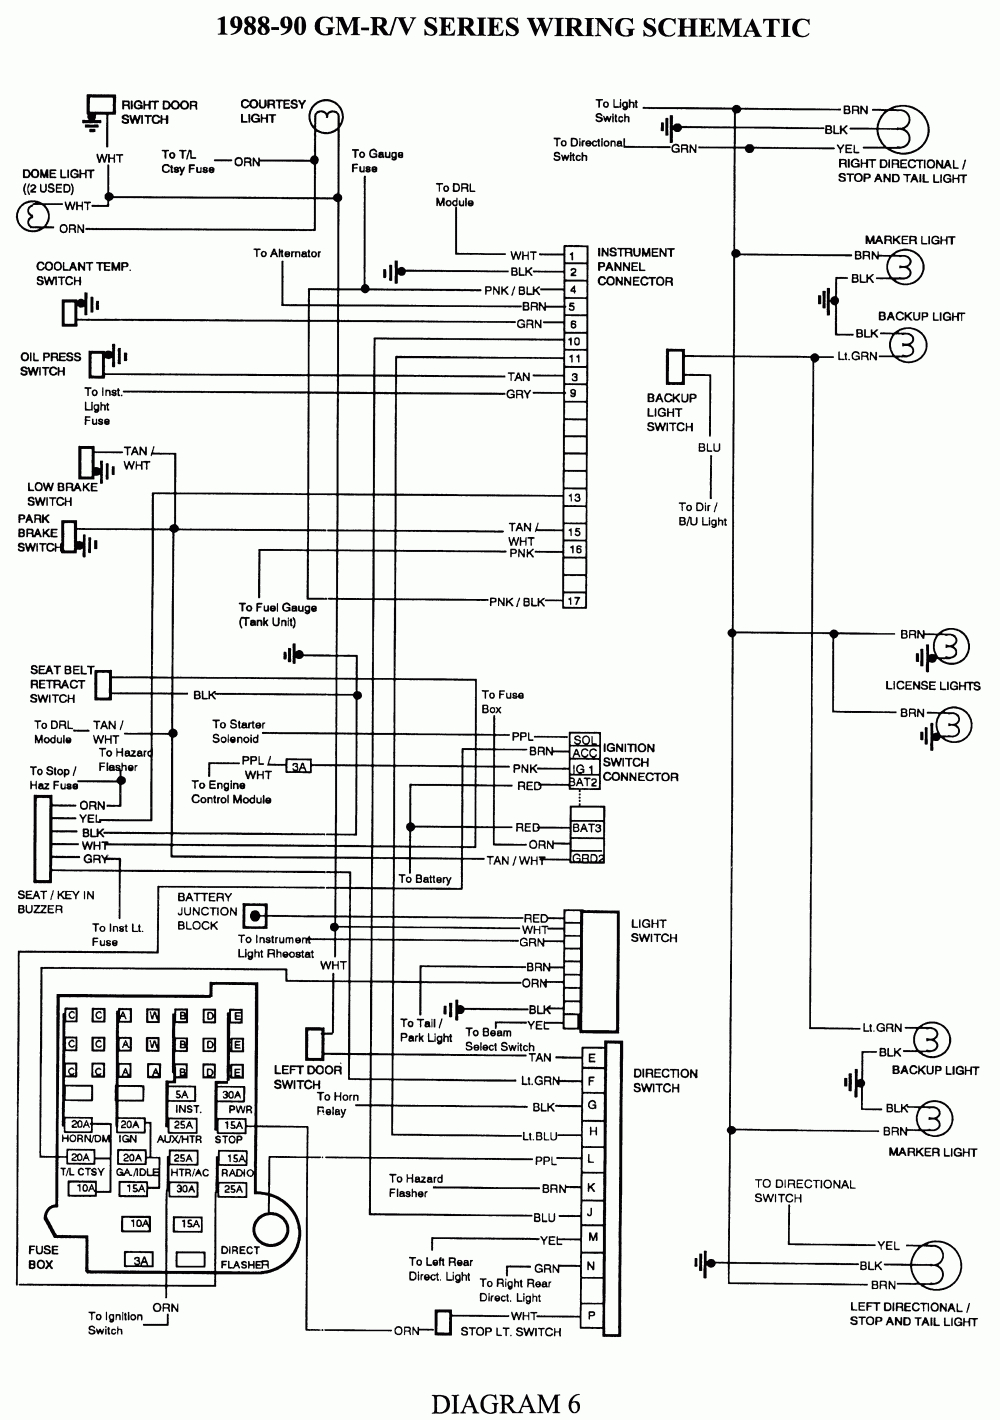 96 Chevy Tail Light Wiring Harness - Wiring Diagram Detailed - Chevy Express Tail Light Wiring Diagram